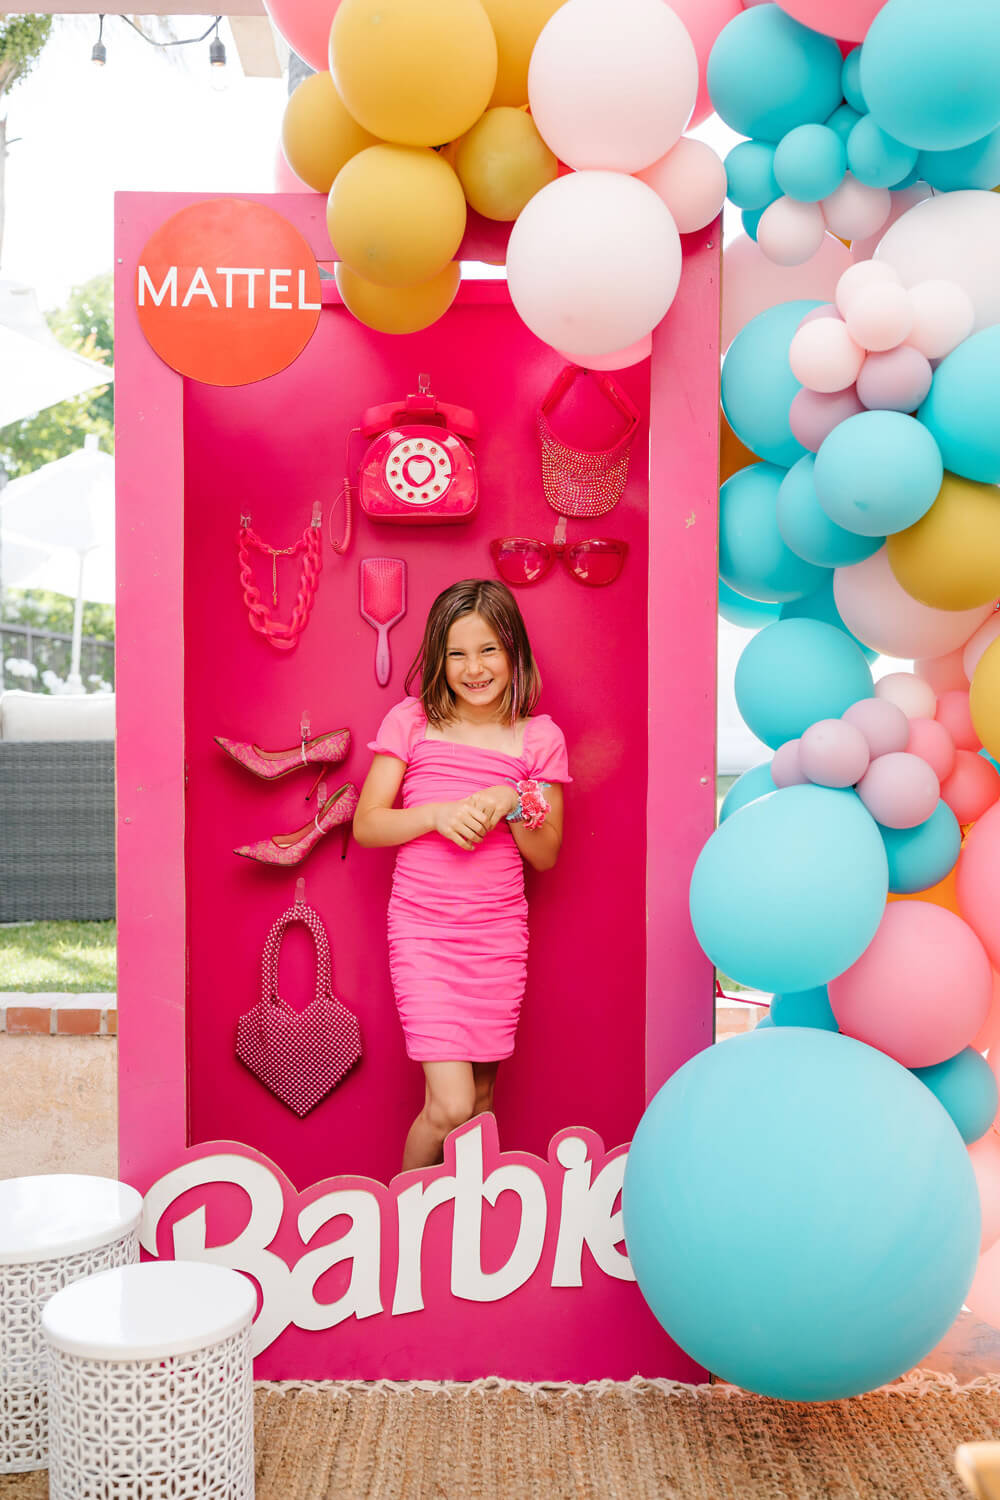 girls photo booth idea for Barbie birthday party